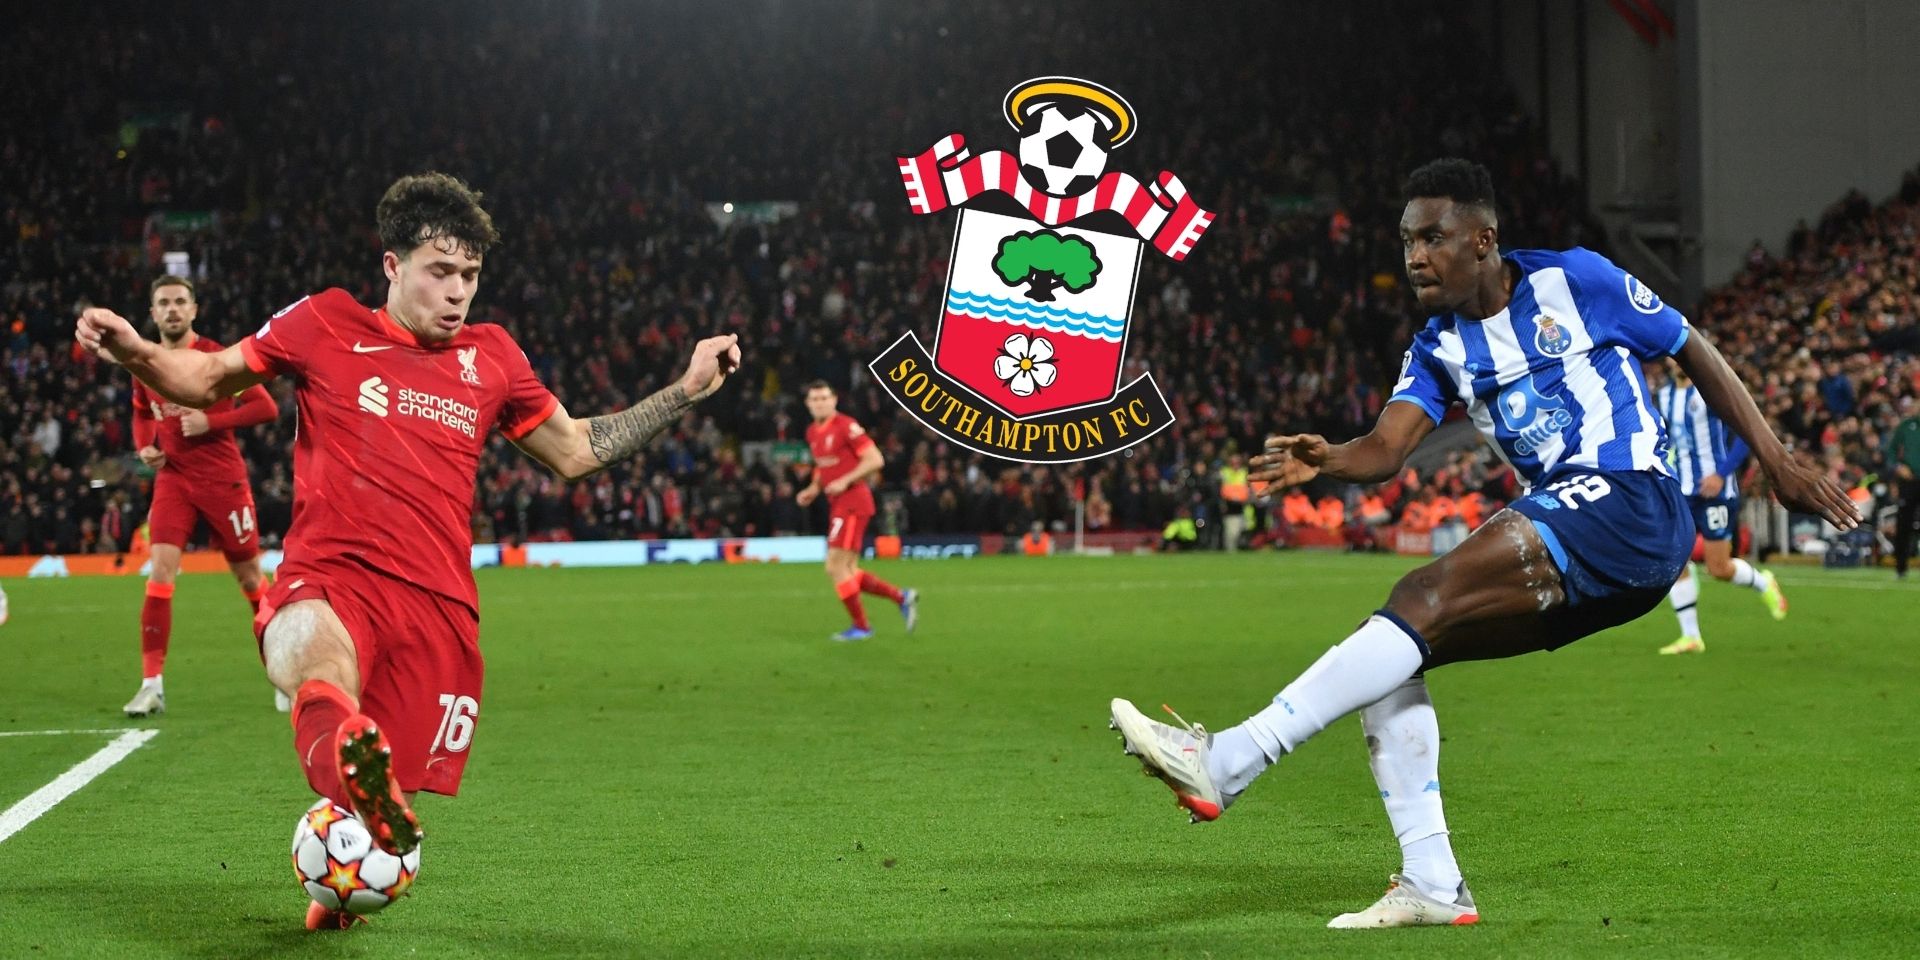 Southampton ready £20 mil move for 21-year-old Liverpool defender as his move away from Anfield edges closer – report